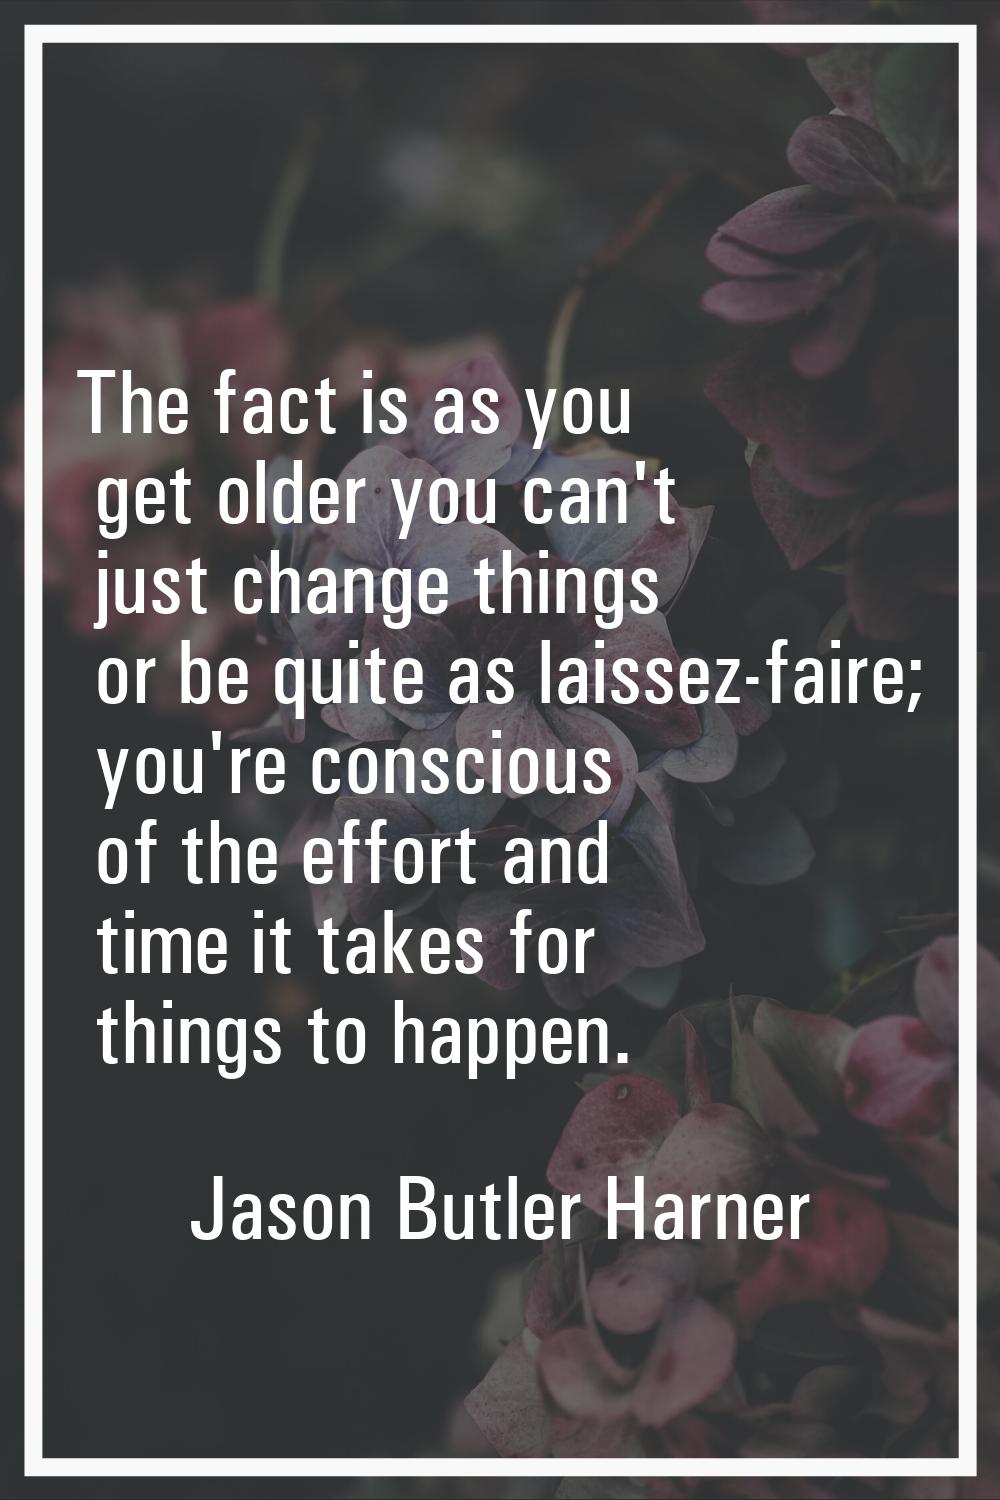 The fact is as you get older you can't just change things or be quite as laissez-faire; you're cons